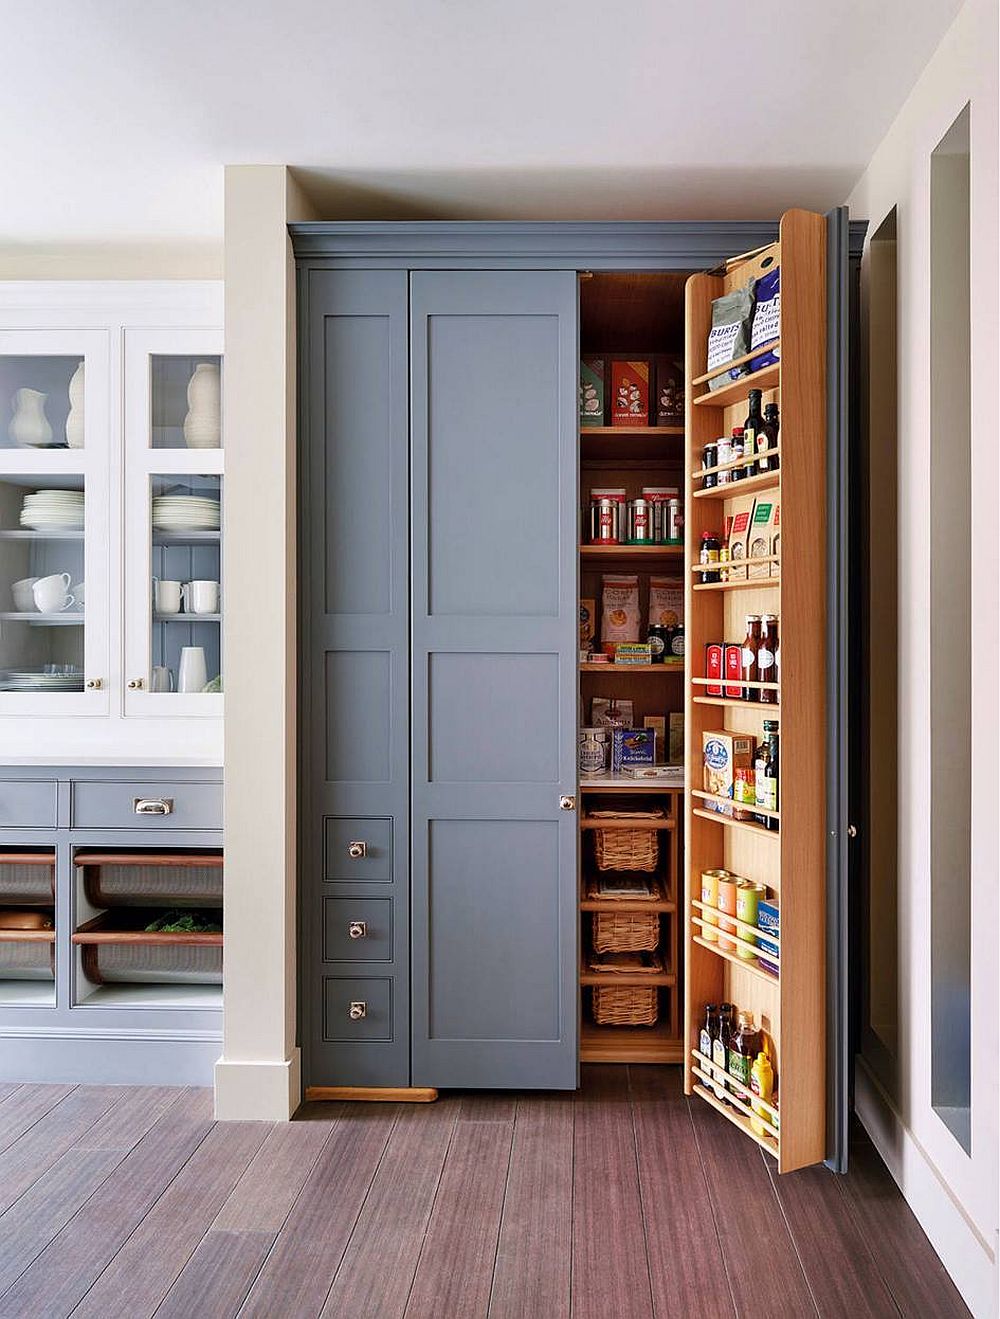 Bluish-gray pantry ddoors give it a polished, modern appeal